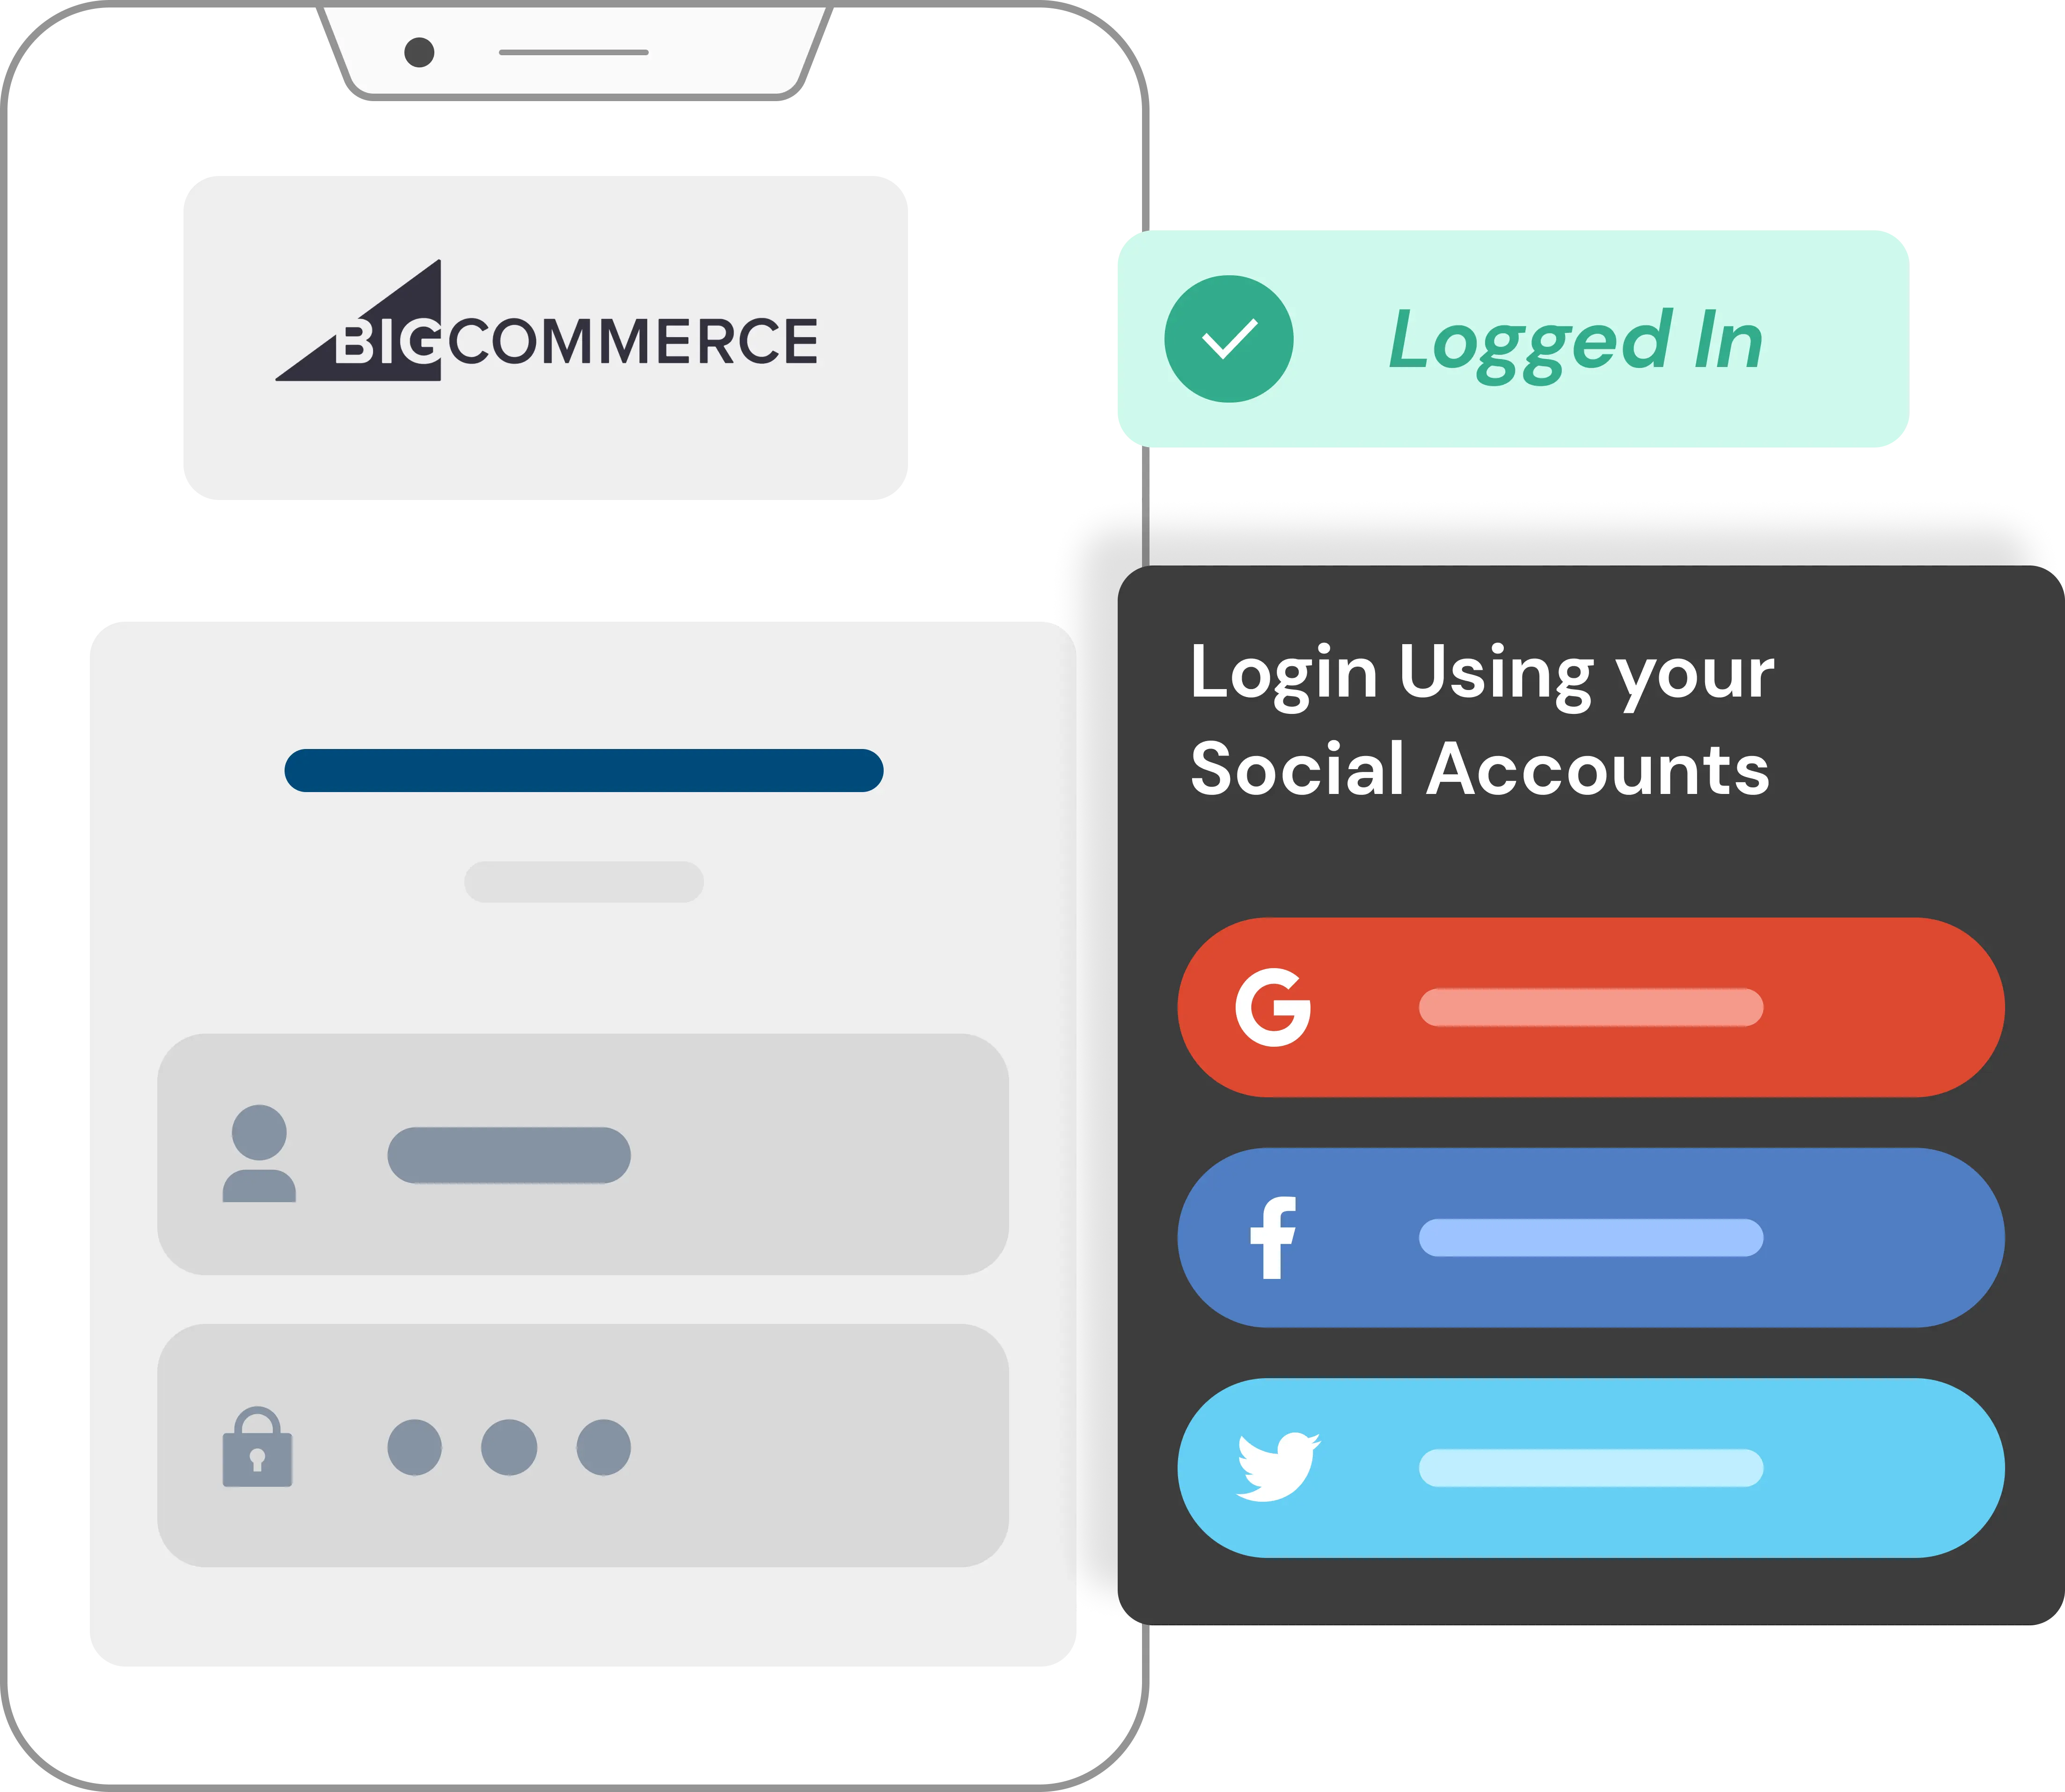 How to set up Social Login for BigCommerce Stores?